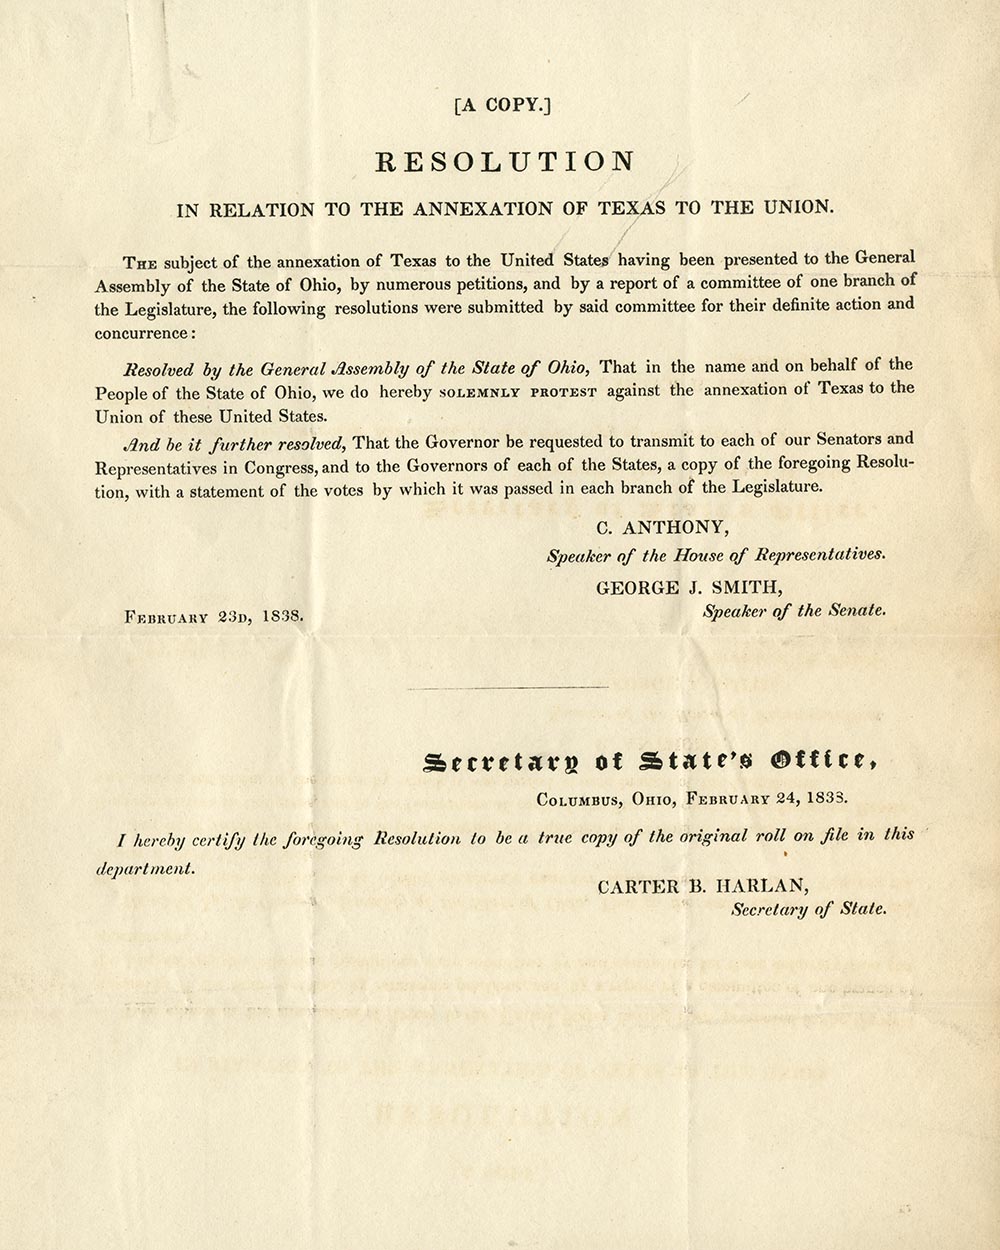 Congressional resolution on Texas annexation